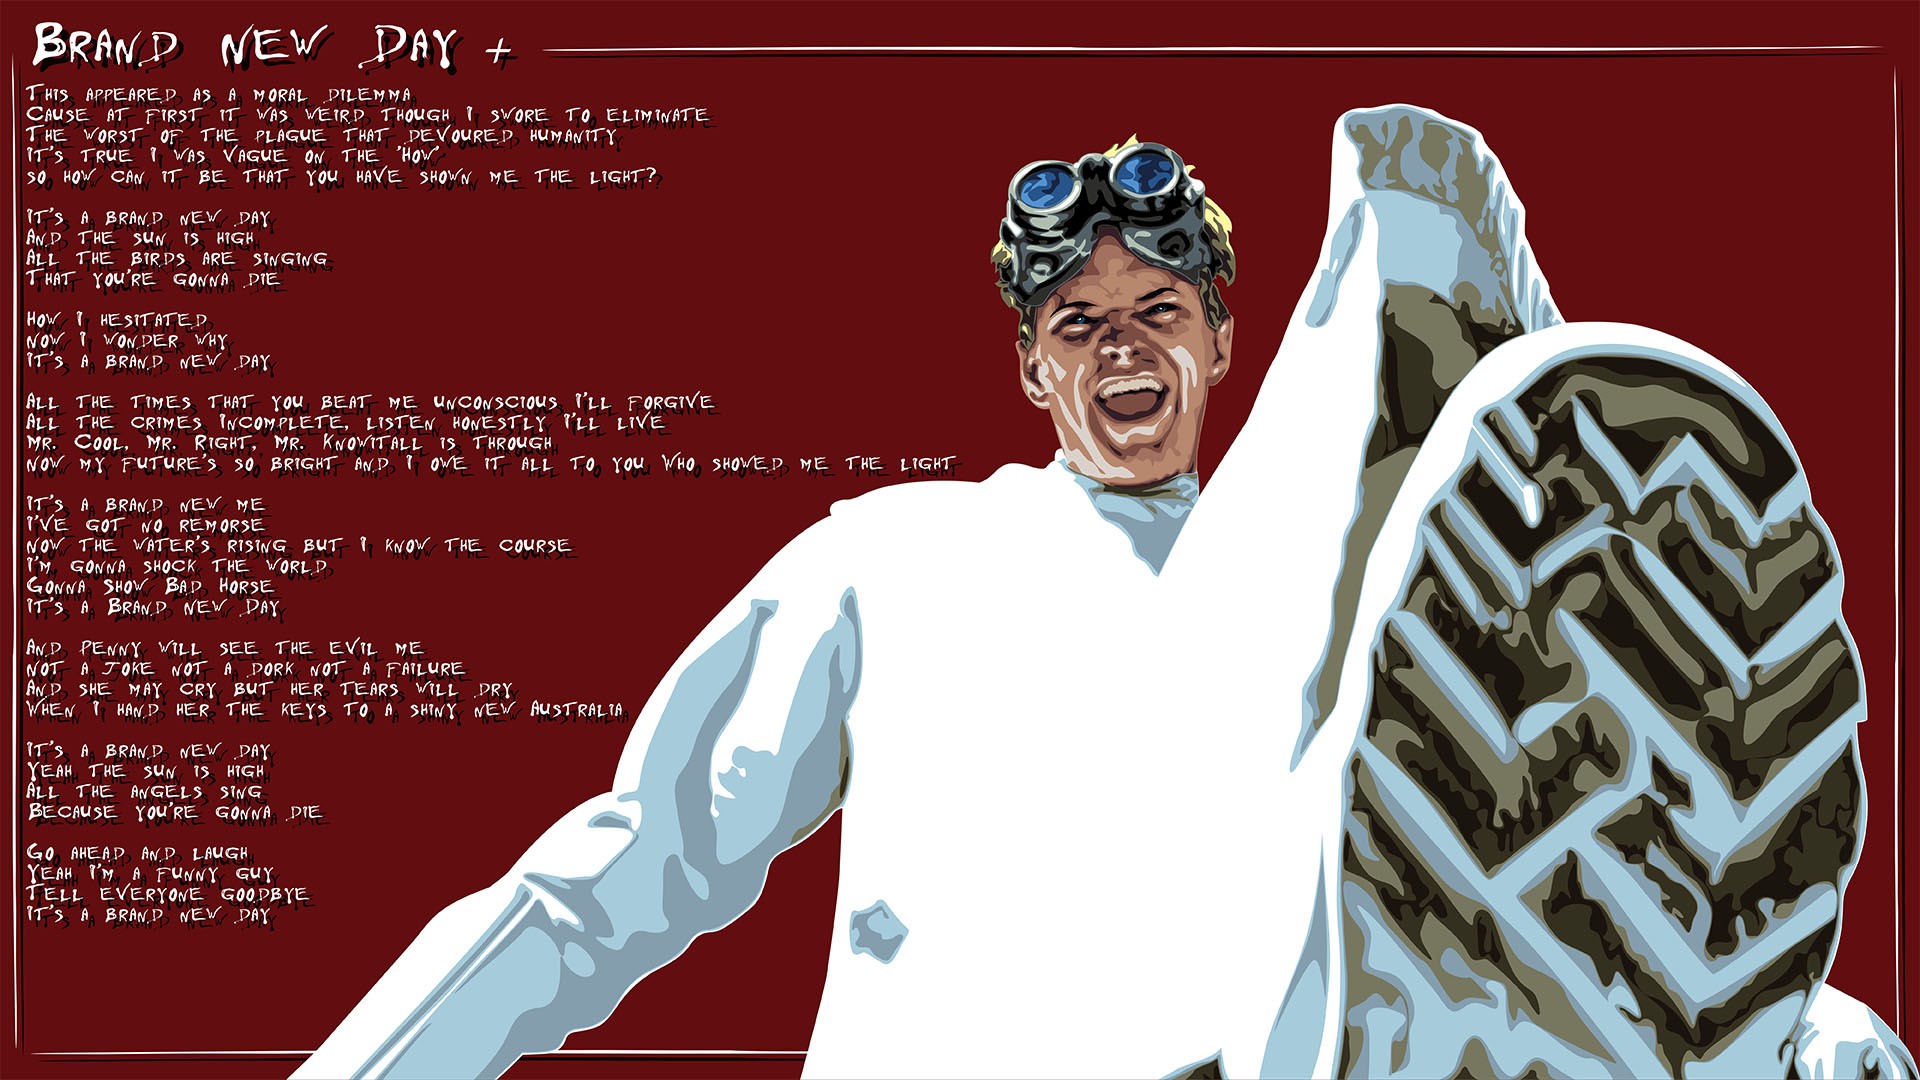 New day текст. The Causal Angel. Dr horrible's Sing-along blog Art.